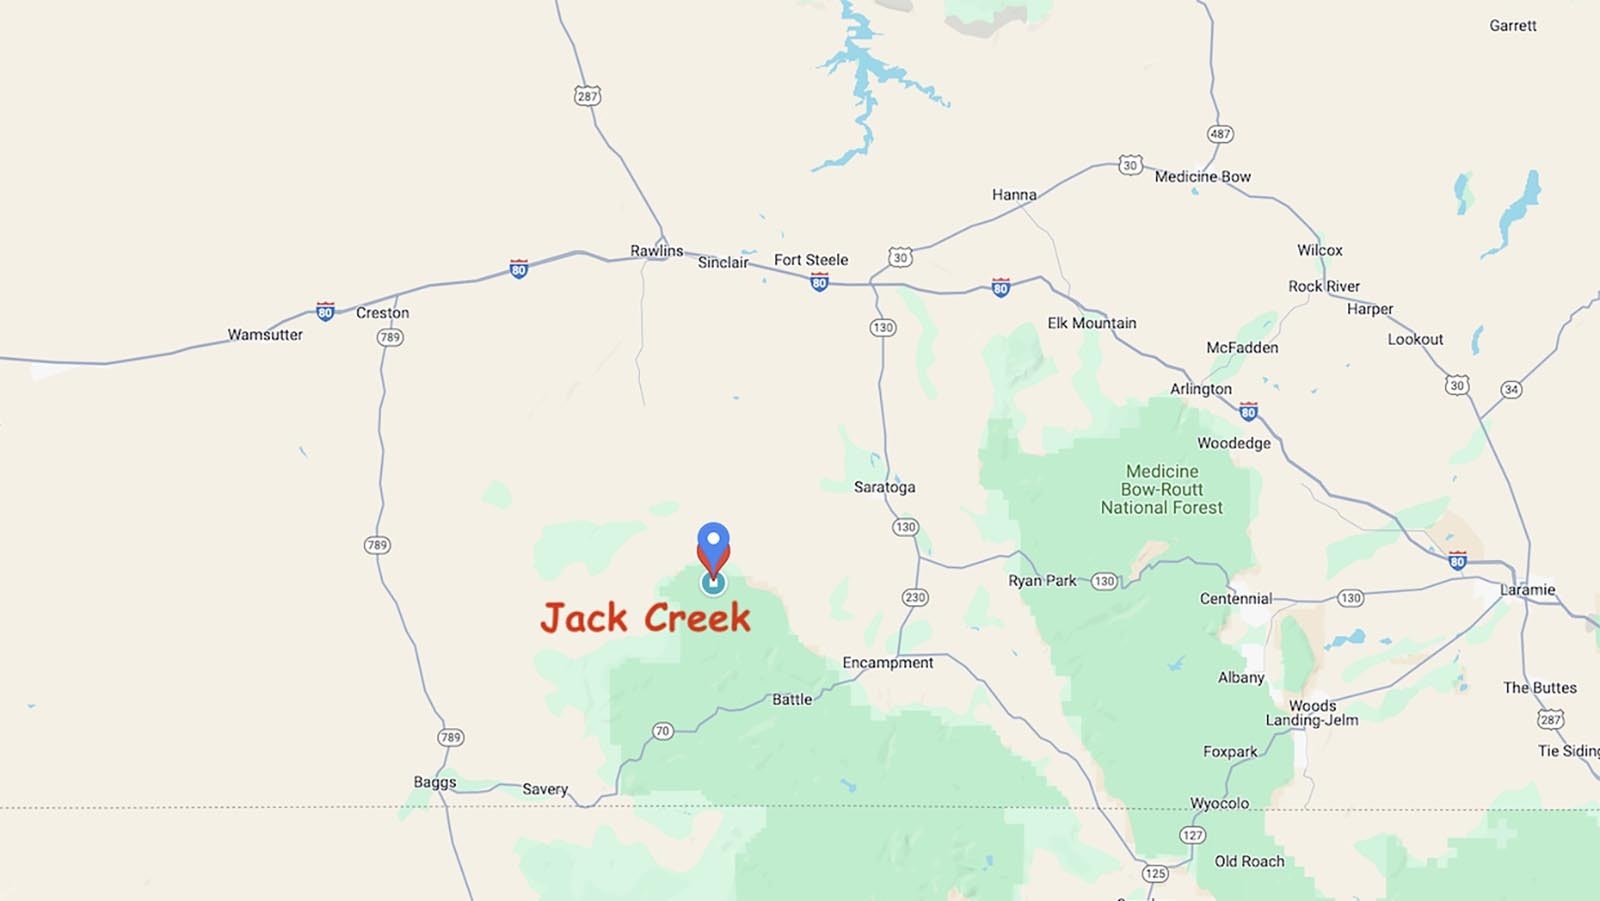 The Jack Creek Fire is located on this map.